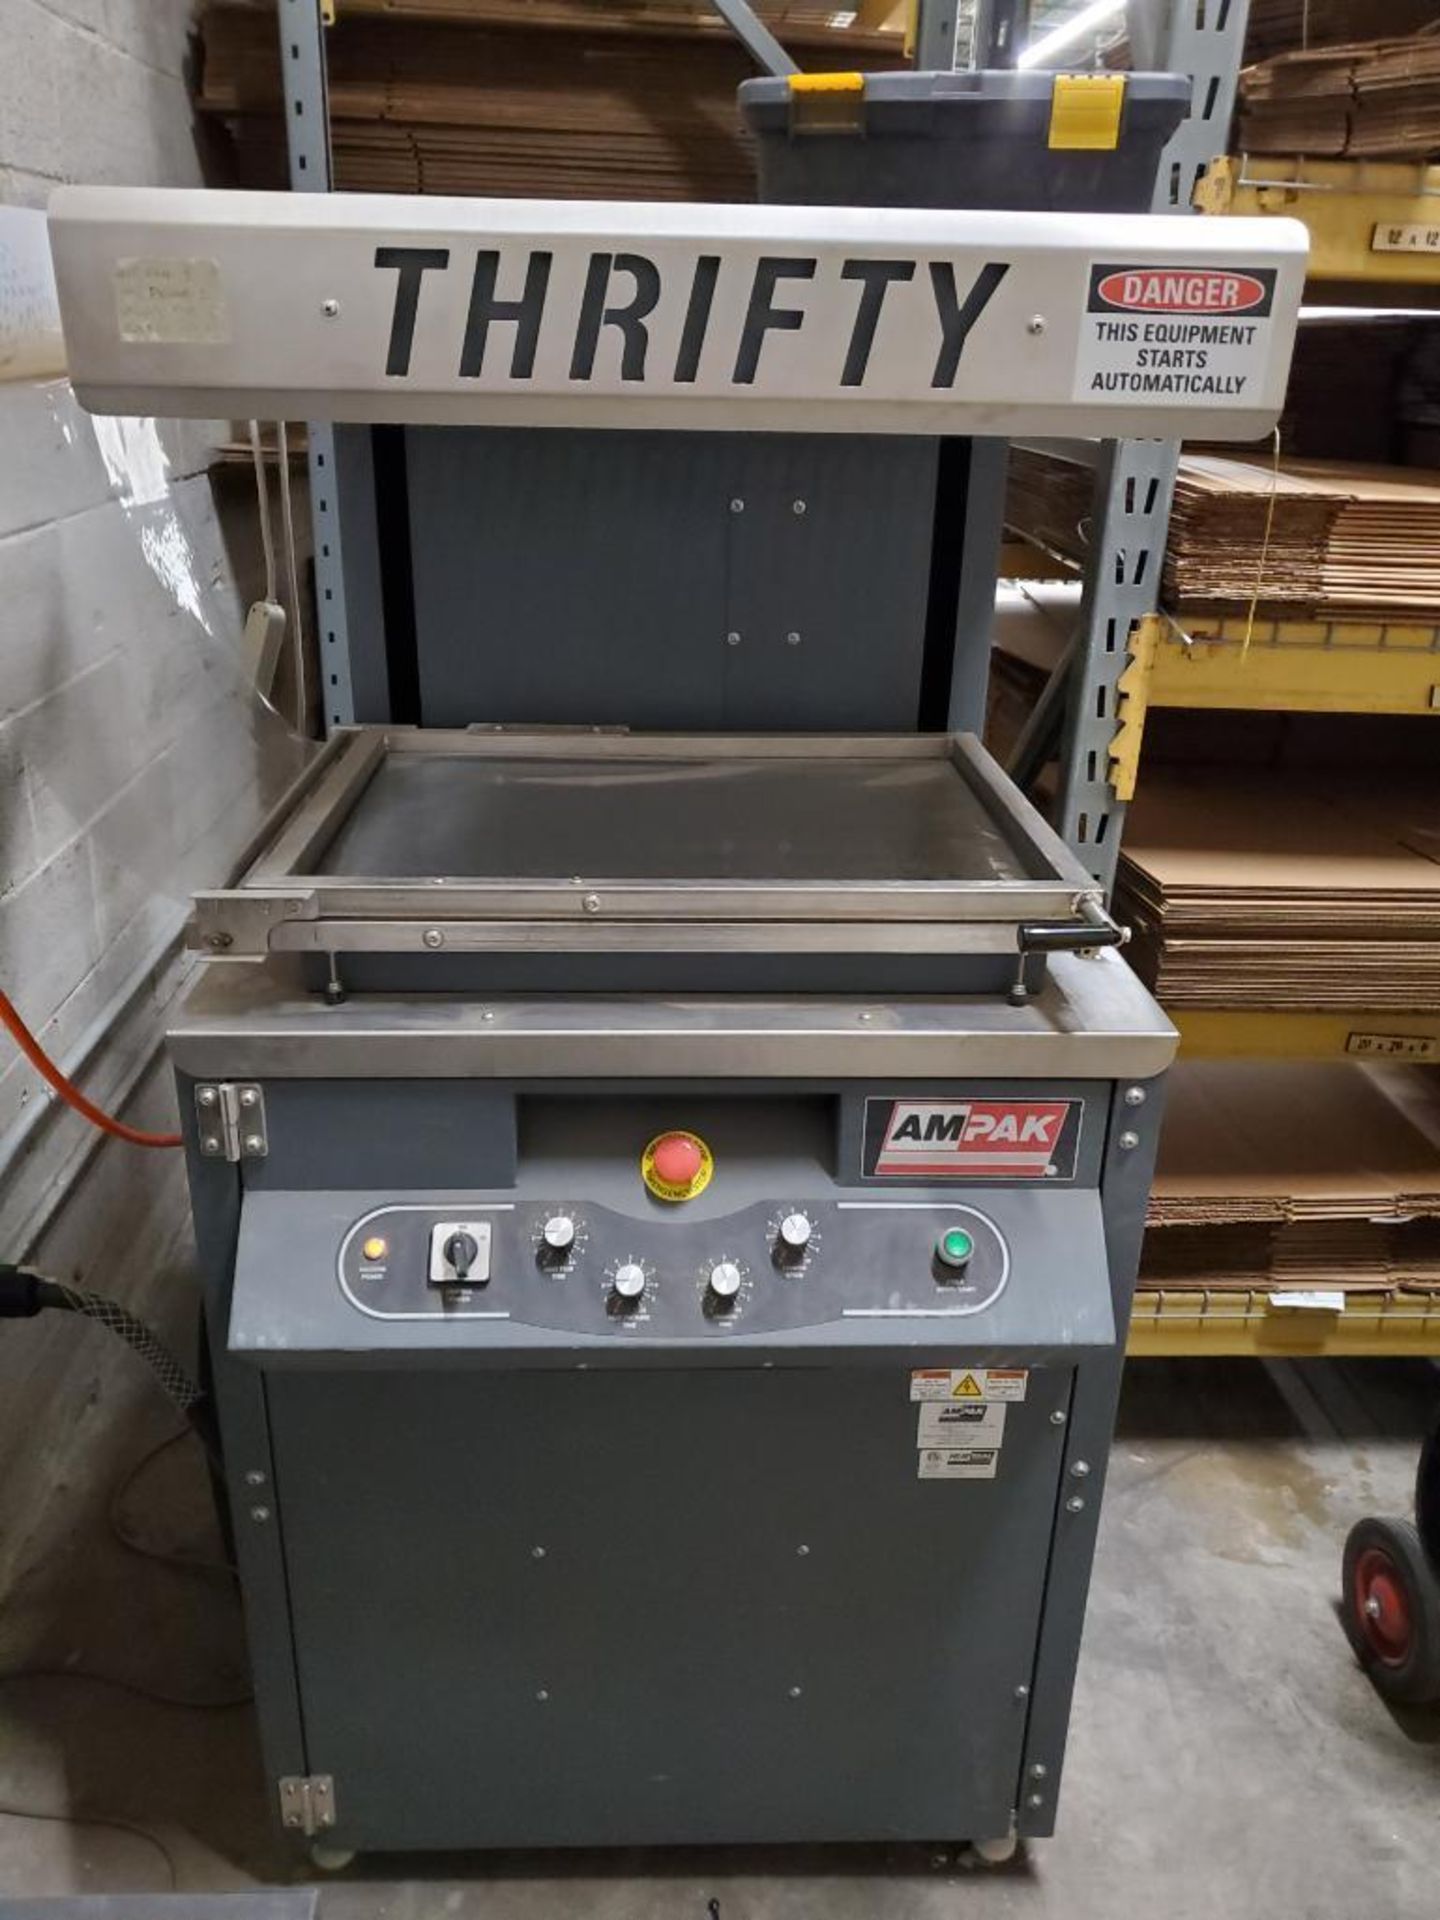 Ampak Thrifty Vacuum Heat Seal Machine, Model TP-DXXXXB, S/N 19-E-1793, 80 PSI, 24" x 18-1/2" Work A - Image 2 of 8